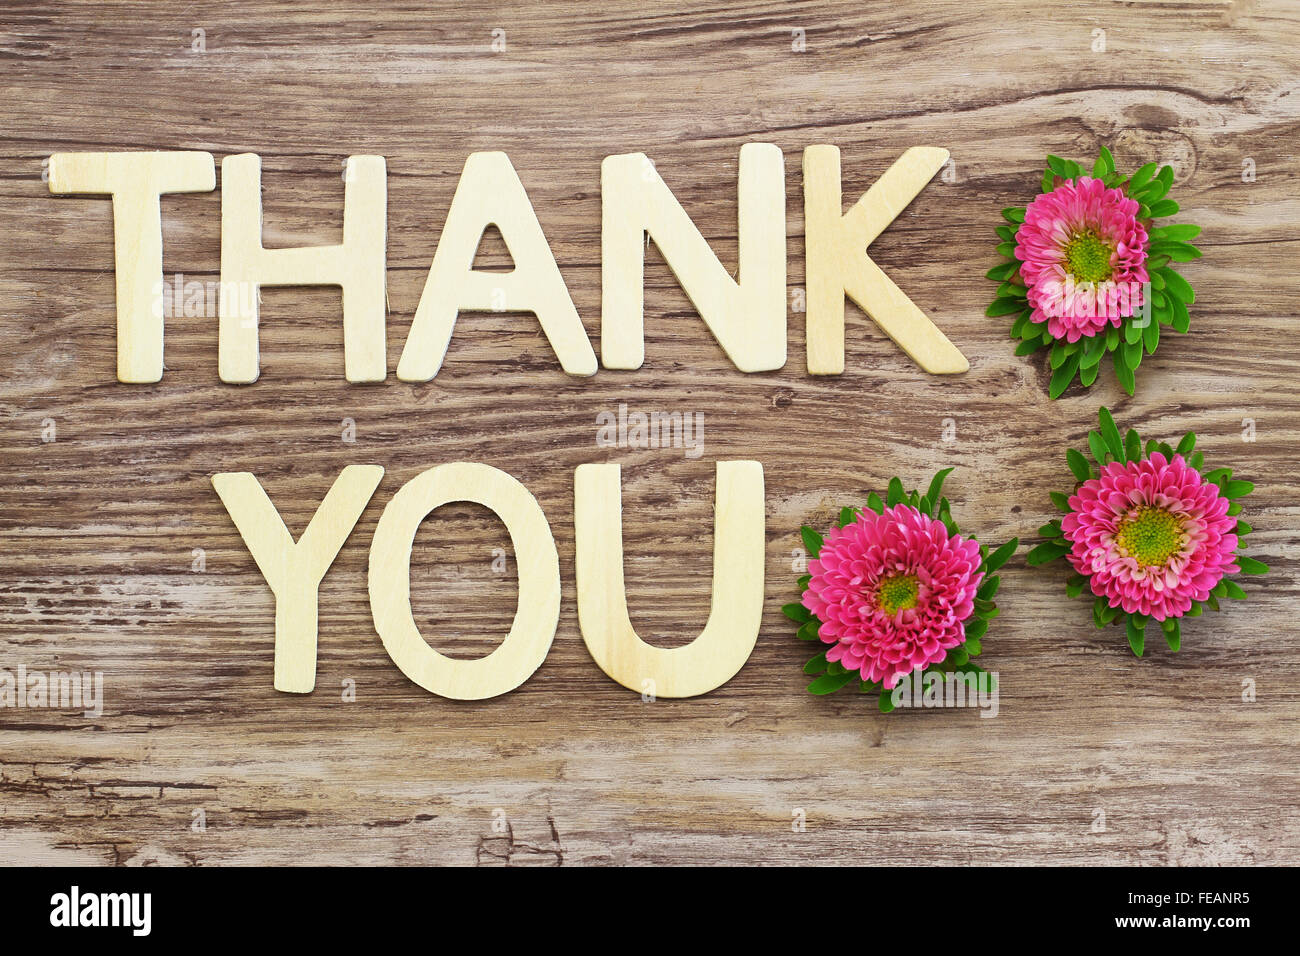 Thank you written with wooden letters and pink daisy flowers Stock Photo